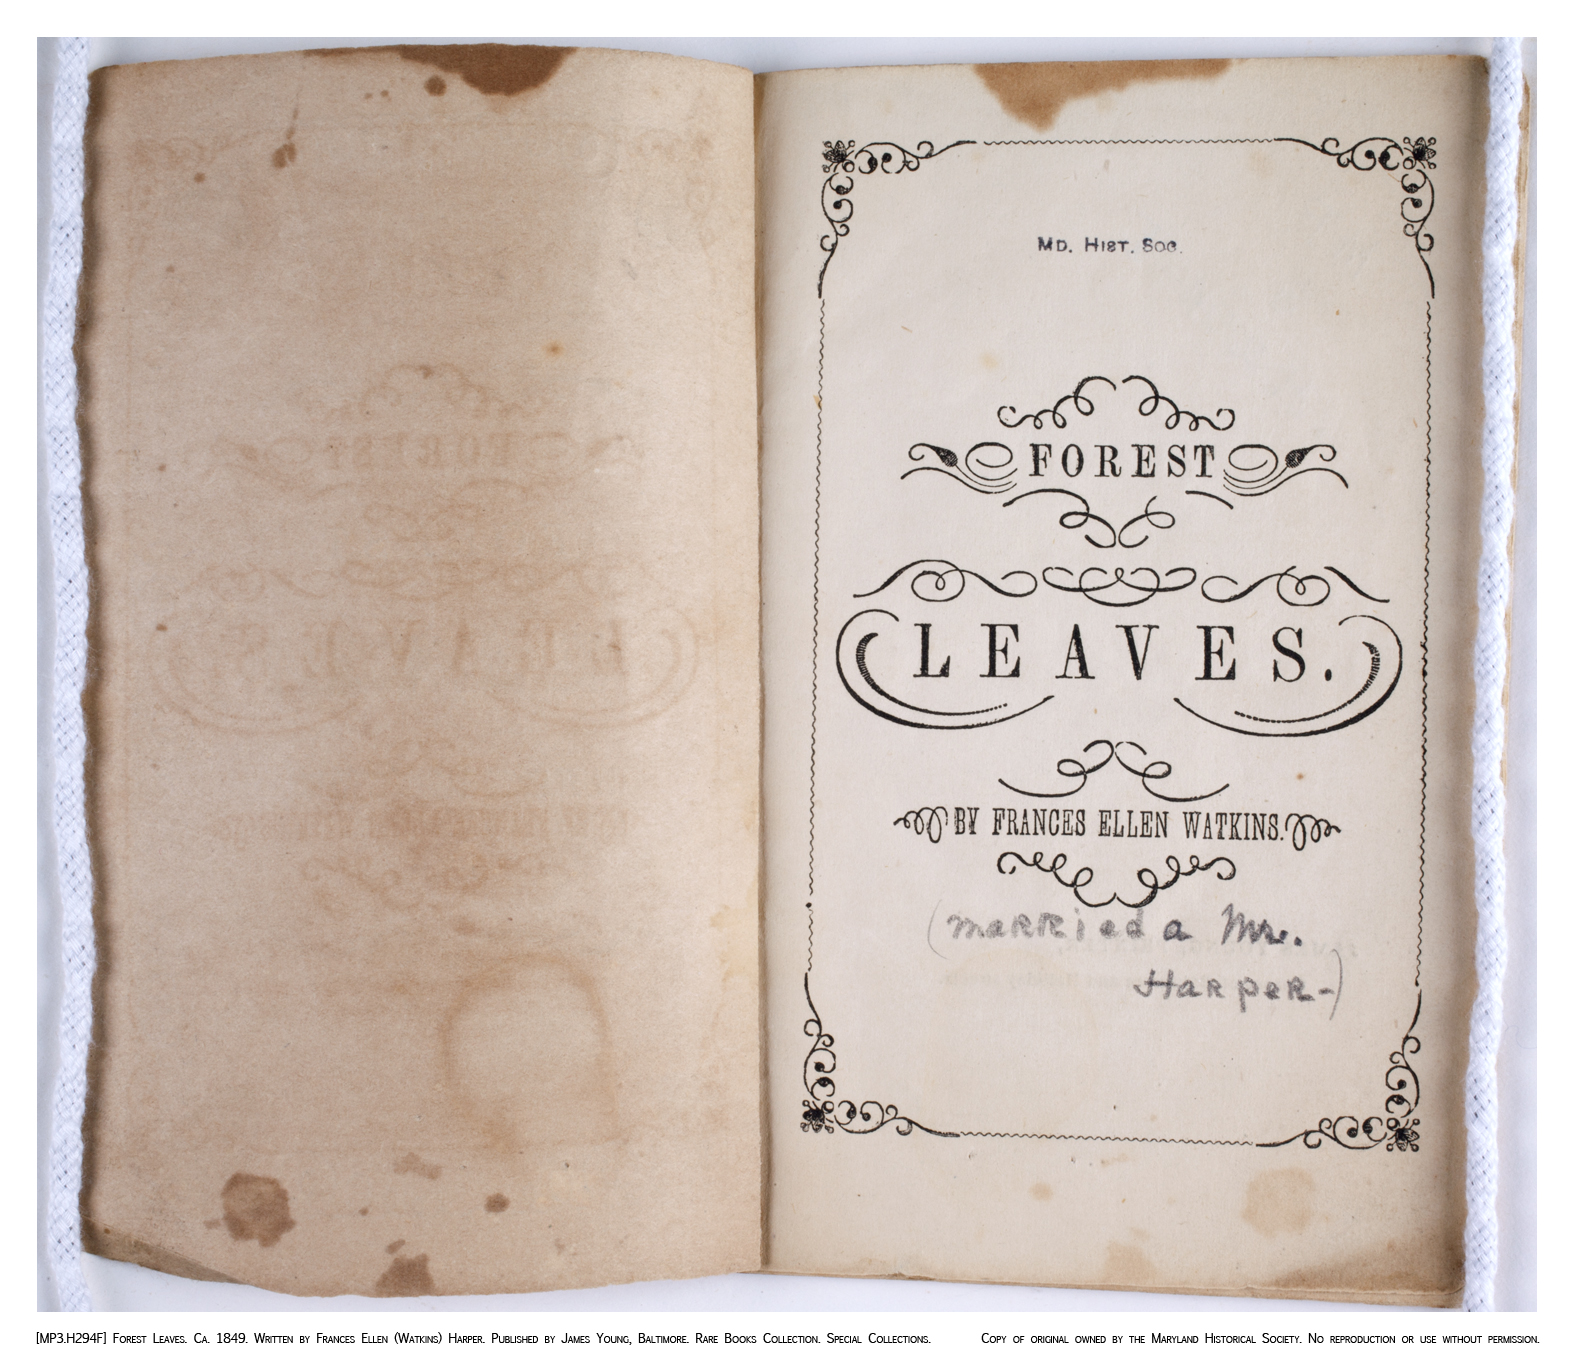 Lost no More: Recovering Frances Ellen Watkins Harper's* Forest Leaves -  Commonplace - The Journal of early American Life